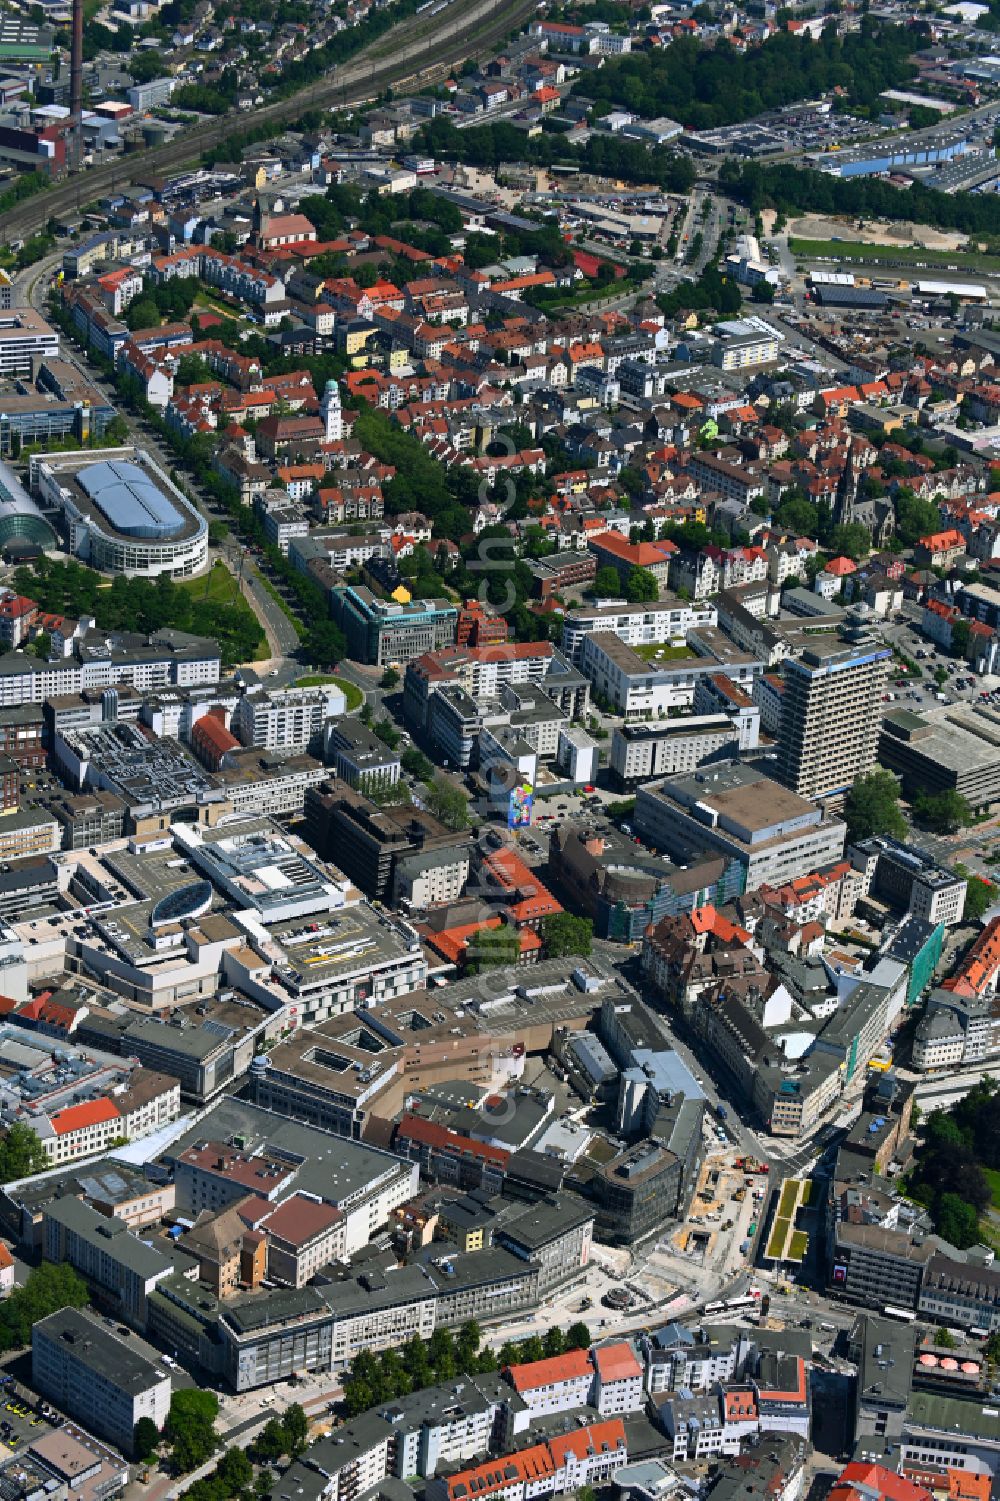 Aerial image Bielefeld - The city center in the downtown area in the district Mitte in Bielefeld in the state North Rhine-Westphalia, Germany